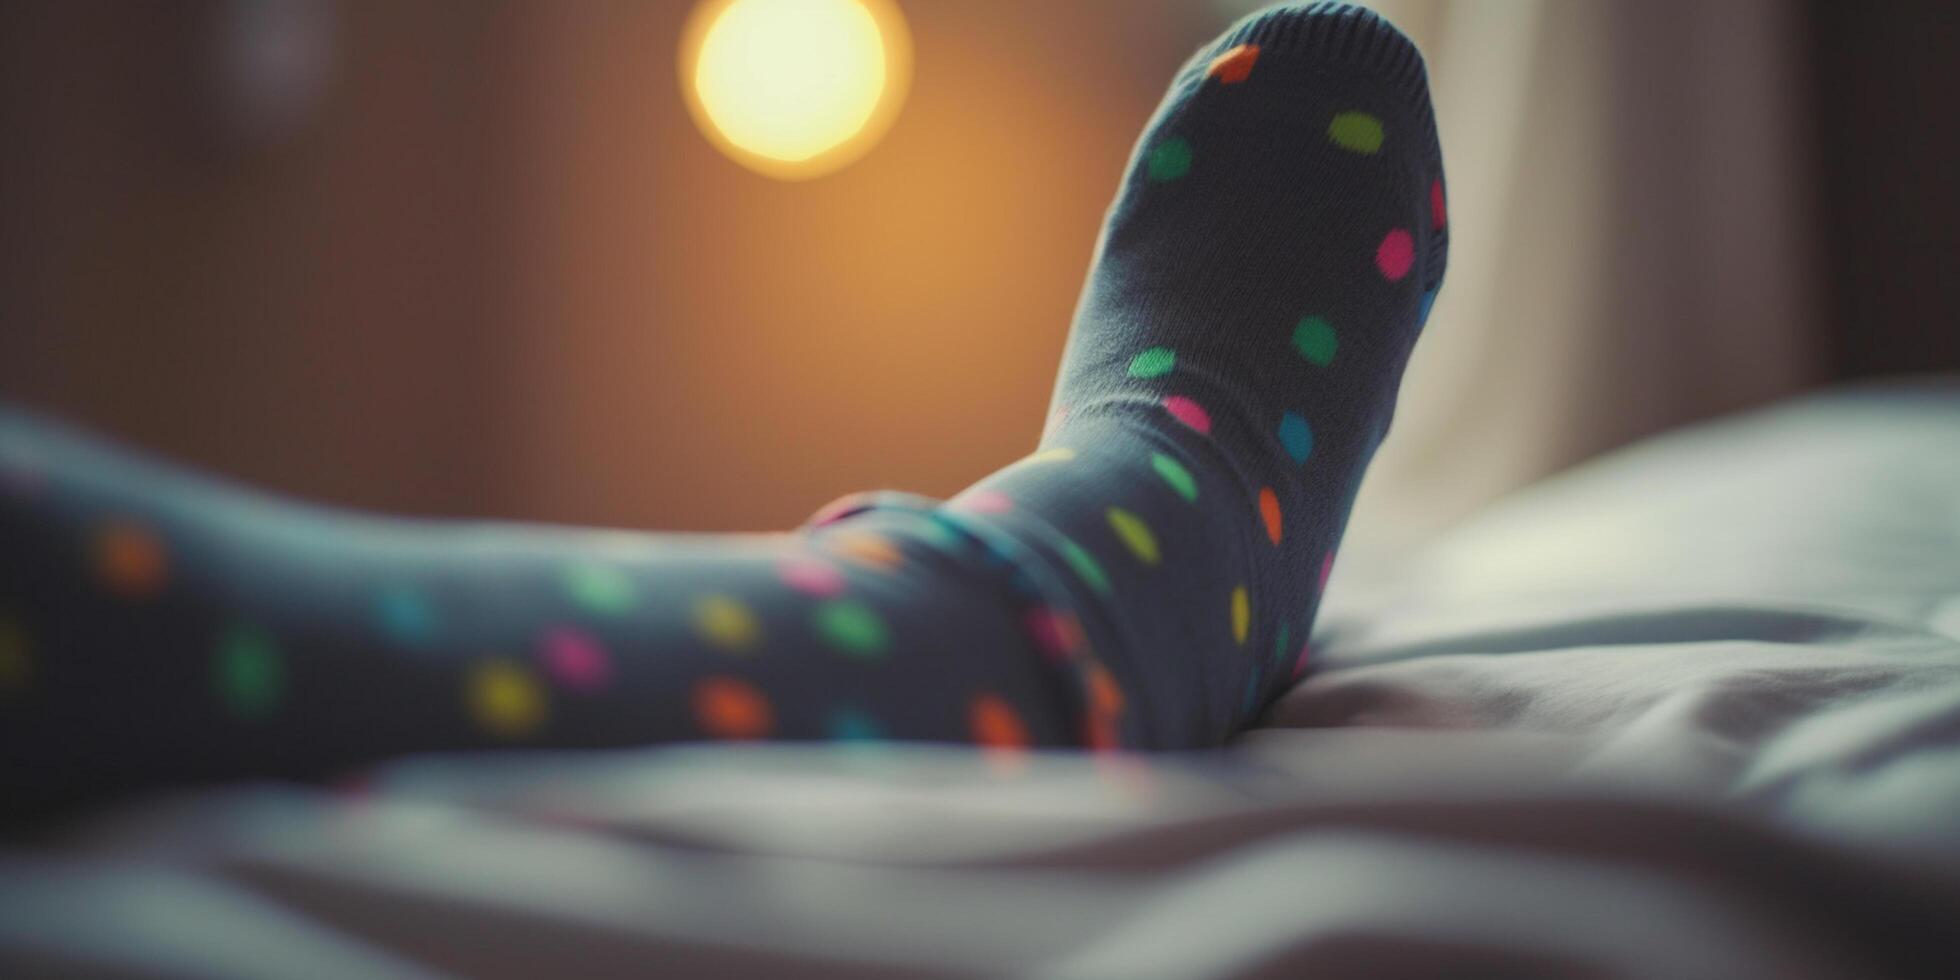 Intimate Close-up of a Woman's Socks in a Bed photo